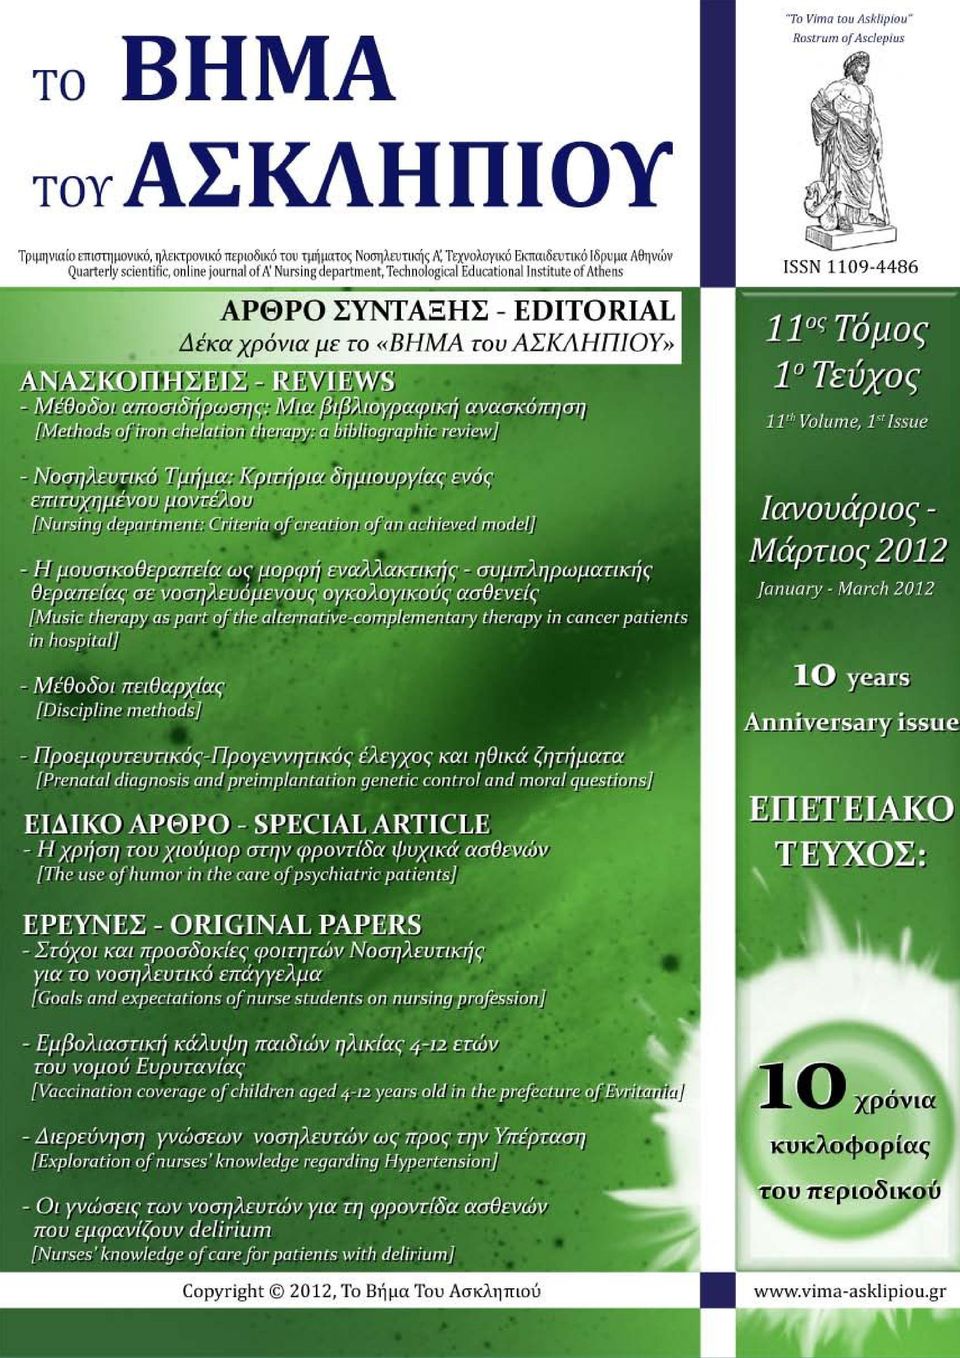 Asclepius 11 th Volume, 1 st Issue, January